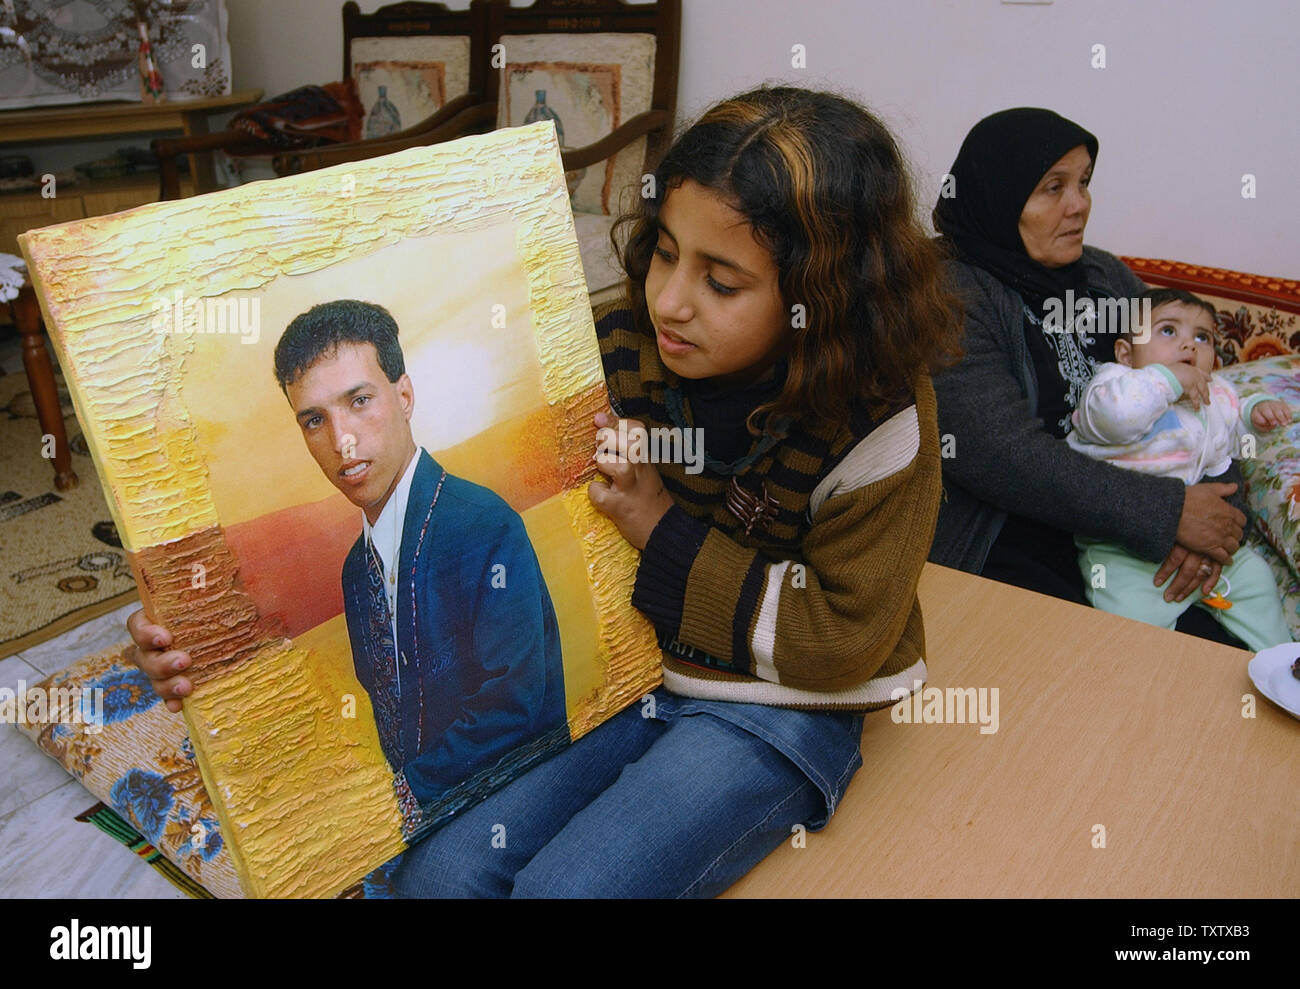 Kasan Suwaid holds a photo of her cousin, kidnapped Israeli soldier, Omar Suwaid, at his home in the Bedouin village Salama in northern Israel, January 27, 2004. Omar was kidnapped in October 2000, with two soldiers whose bodies will be returned to Israel in a controversial  prisoner swap brokered by Germany. Israel will receive the bodies of three slain Israeli soldiers and an Israeli businessman in exchange for releasing 59 bodies of Hizbollah fighters and more than 400 Arab prisoners. (UPI Photo/Debbie Hill) Stock Photo